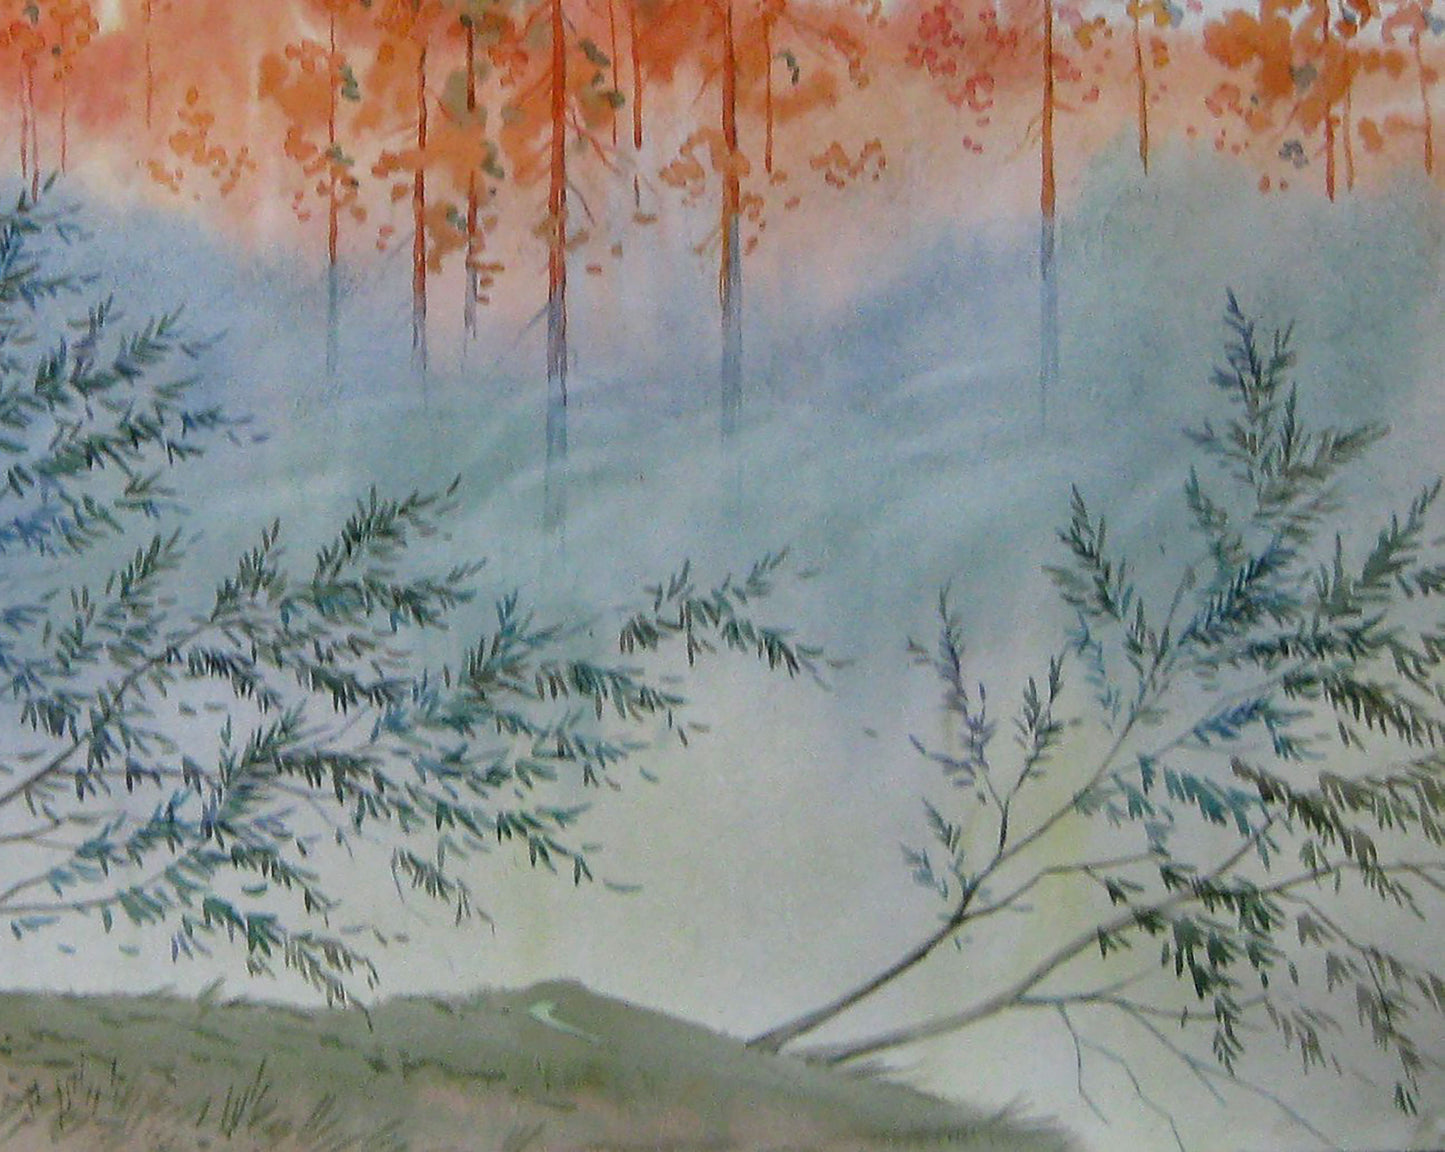 Morning with Fog portrayed in a watercolor painting by Valery Savenets